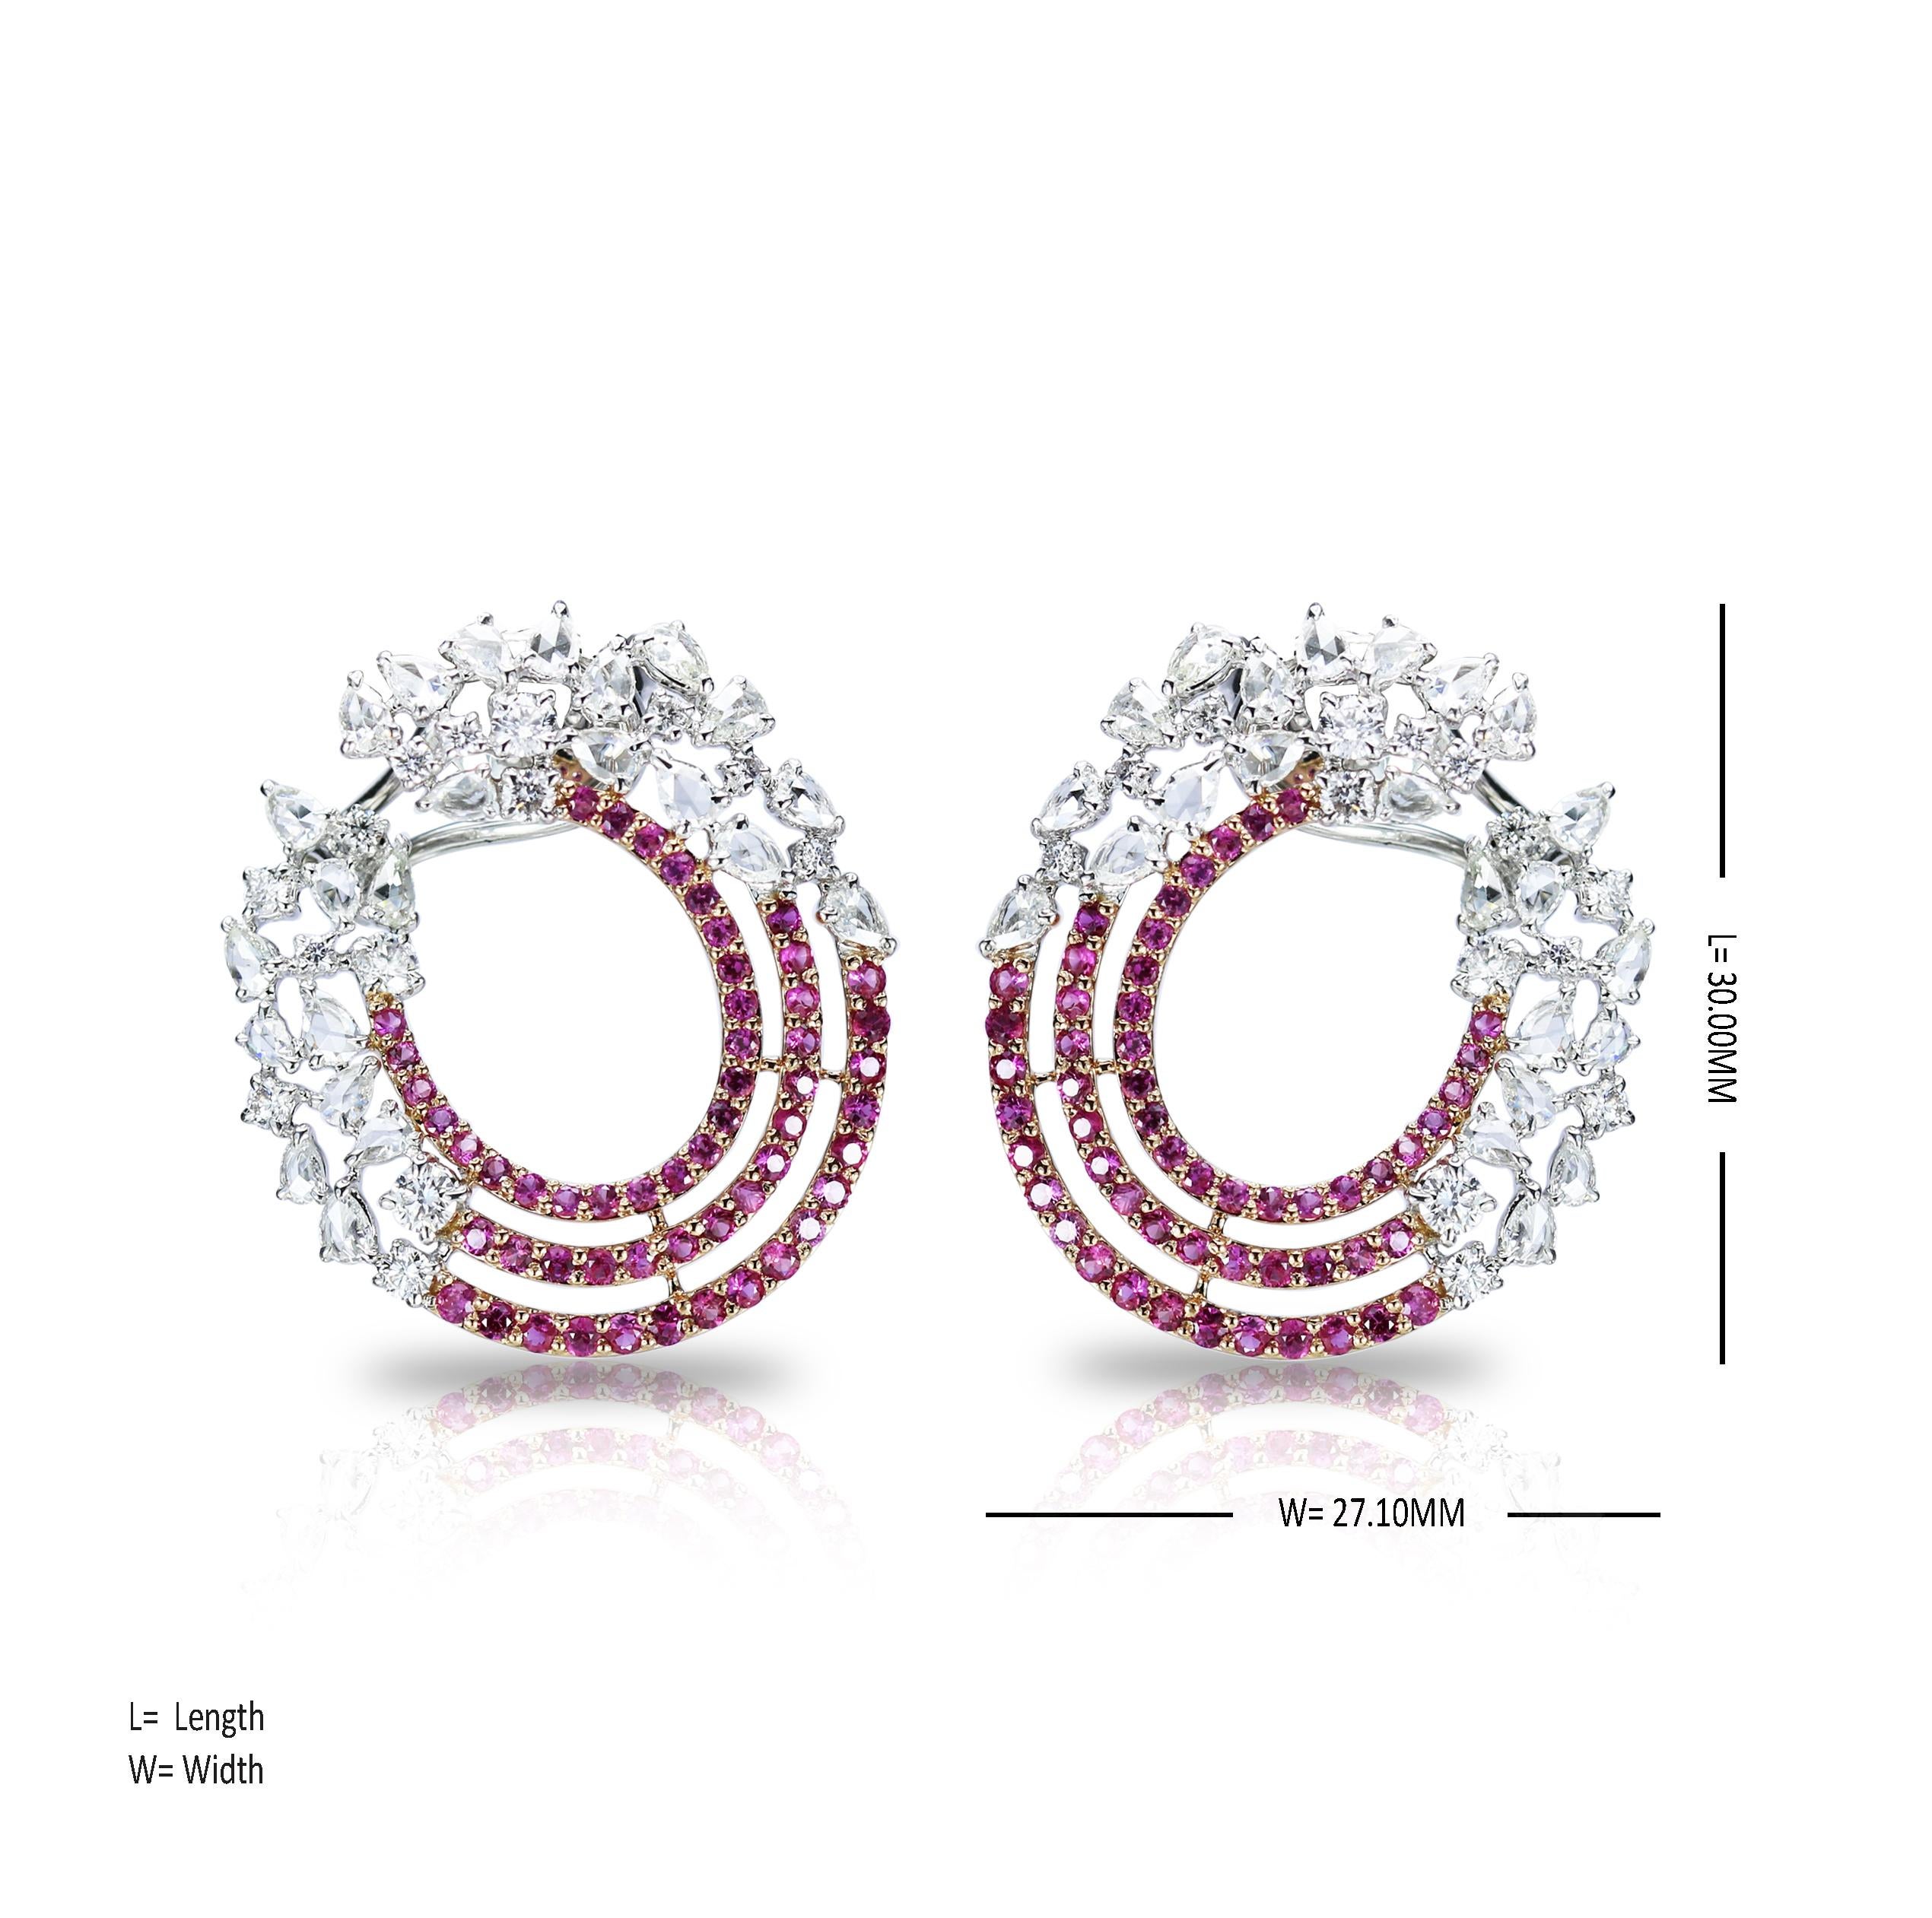 Studio Rêves Diamond and Pink Sapphire Earrings in 18 Karat Gold In New Condition For Sale In Mumbai, Maharashtra